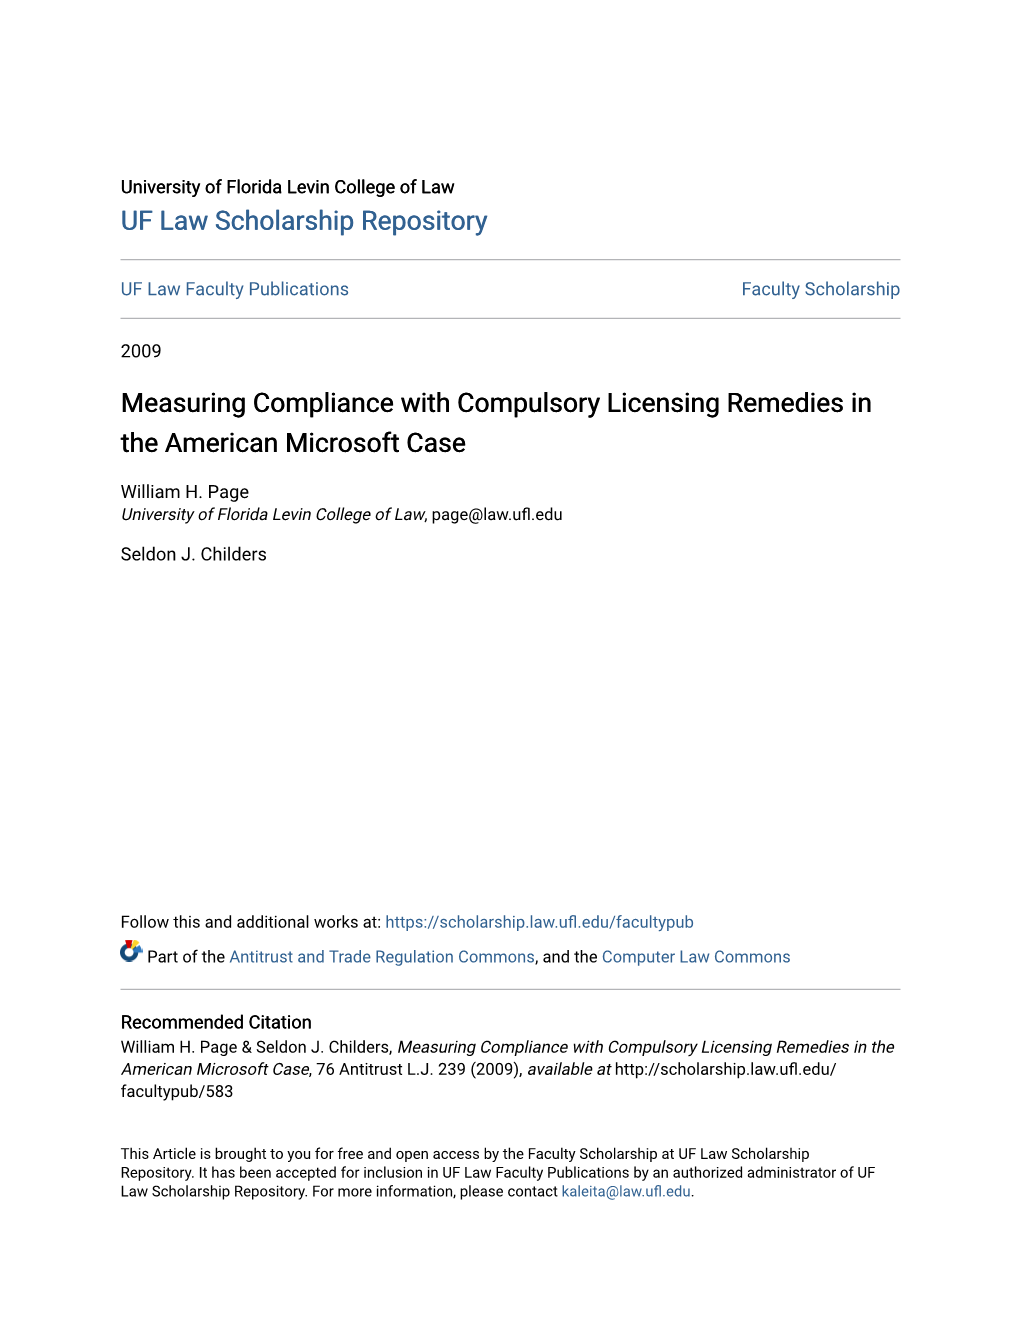 Measuring Compliance with Compulsory Licensing Remedies in the American Microsoft Case